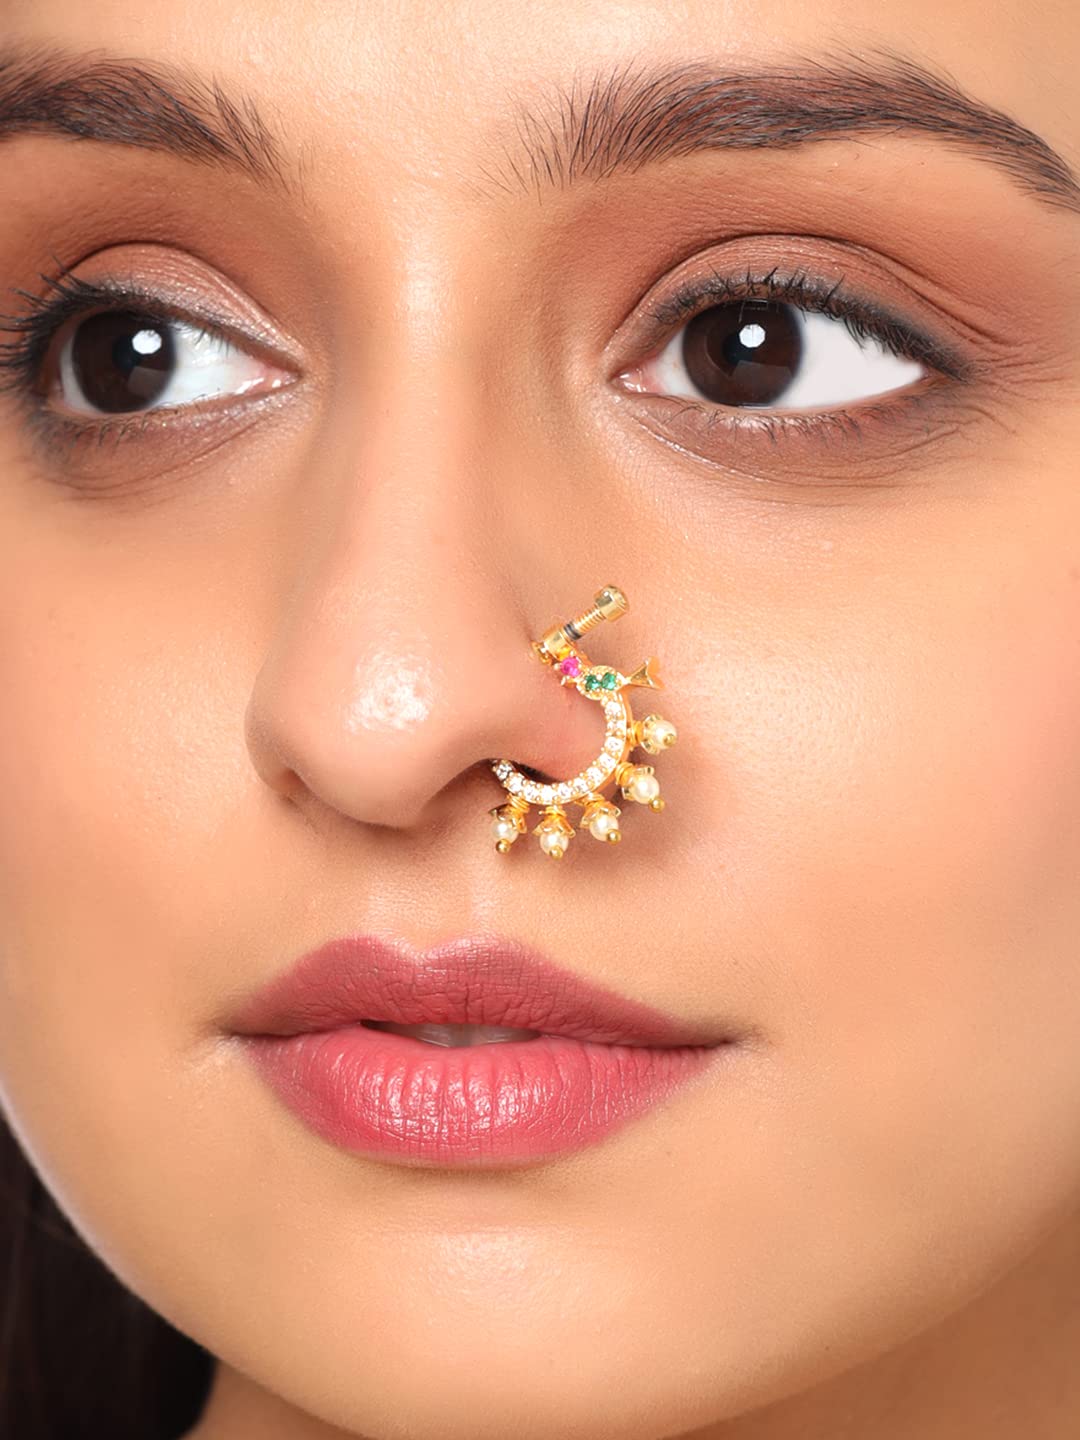 Shop For Best Gold Nose Rings From Widest Range Online